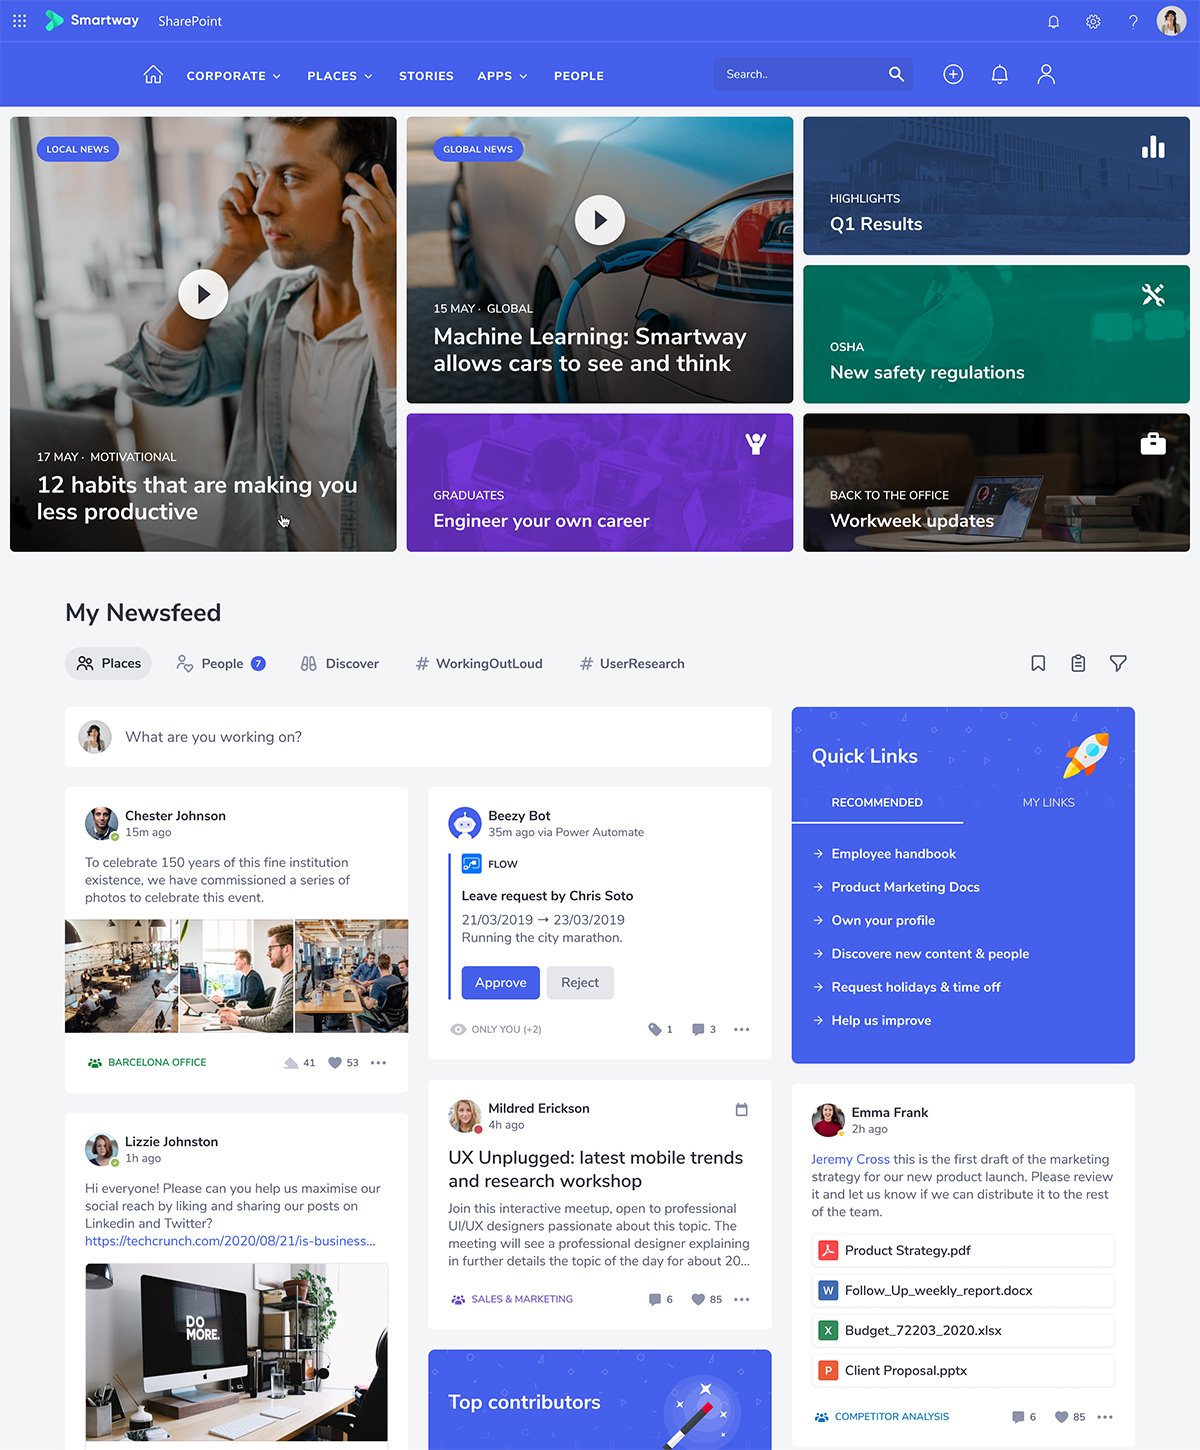 Home newfeed for employees